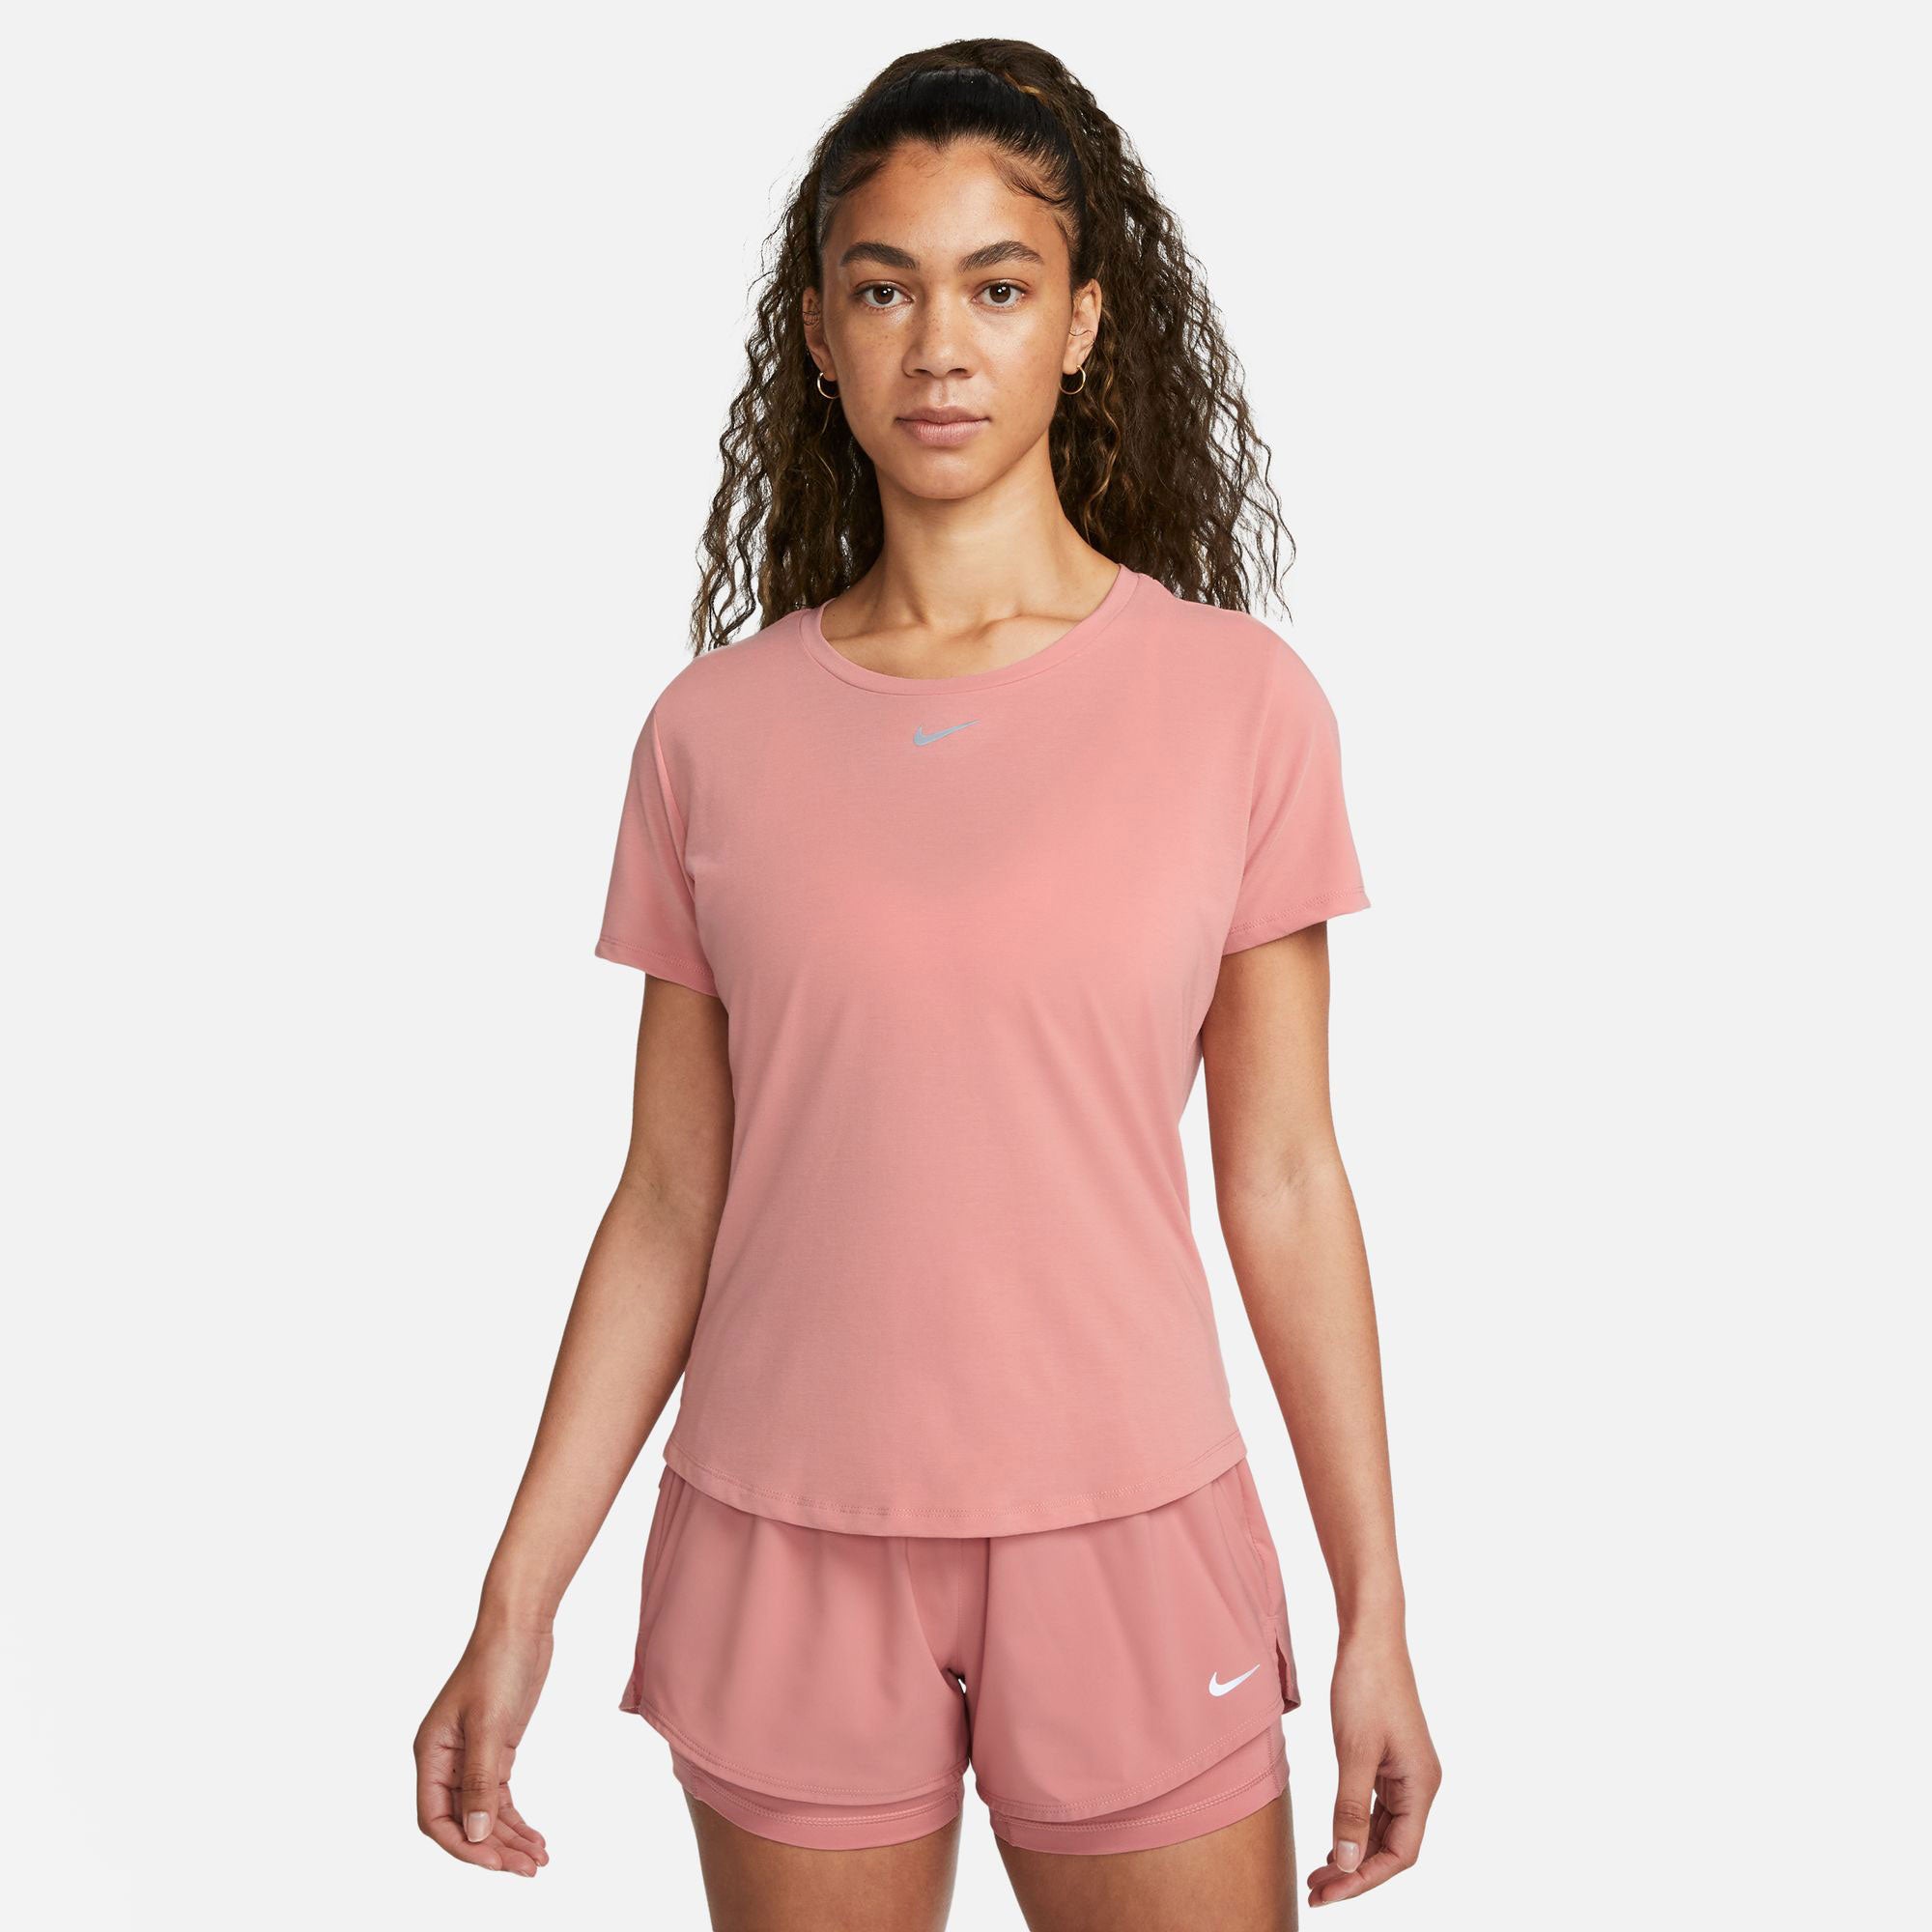 Nike One Luxe Dri-FIT Women's Standard Fit Shirt Pink (1)